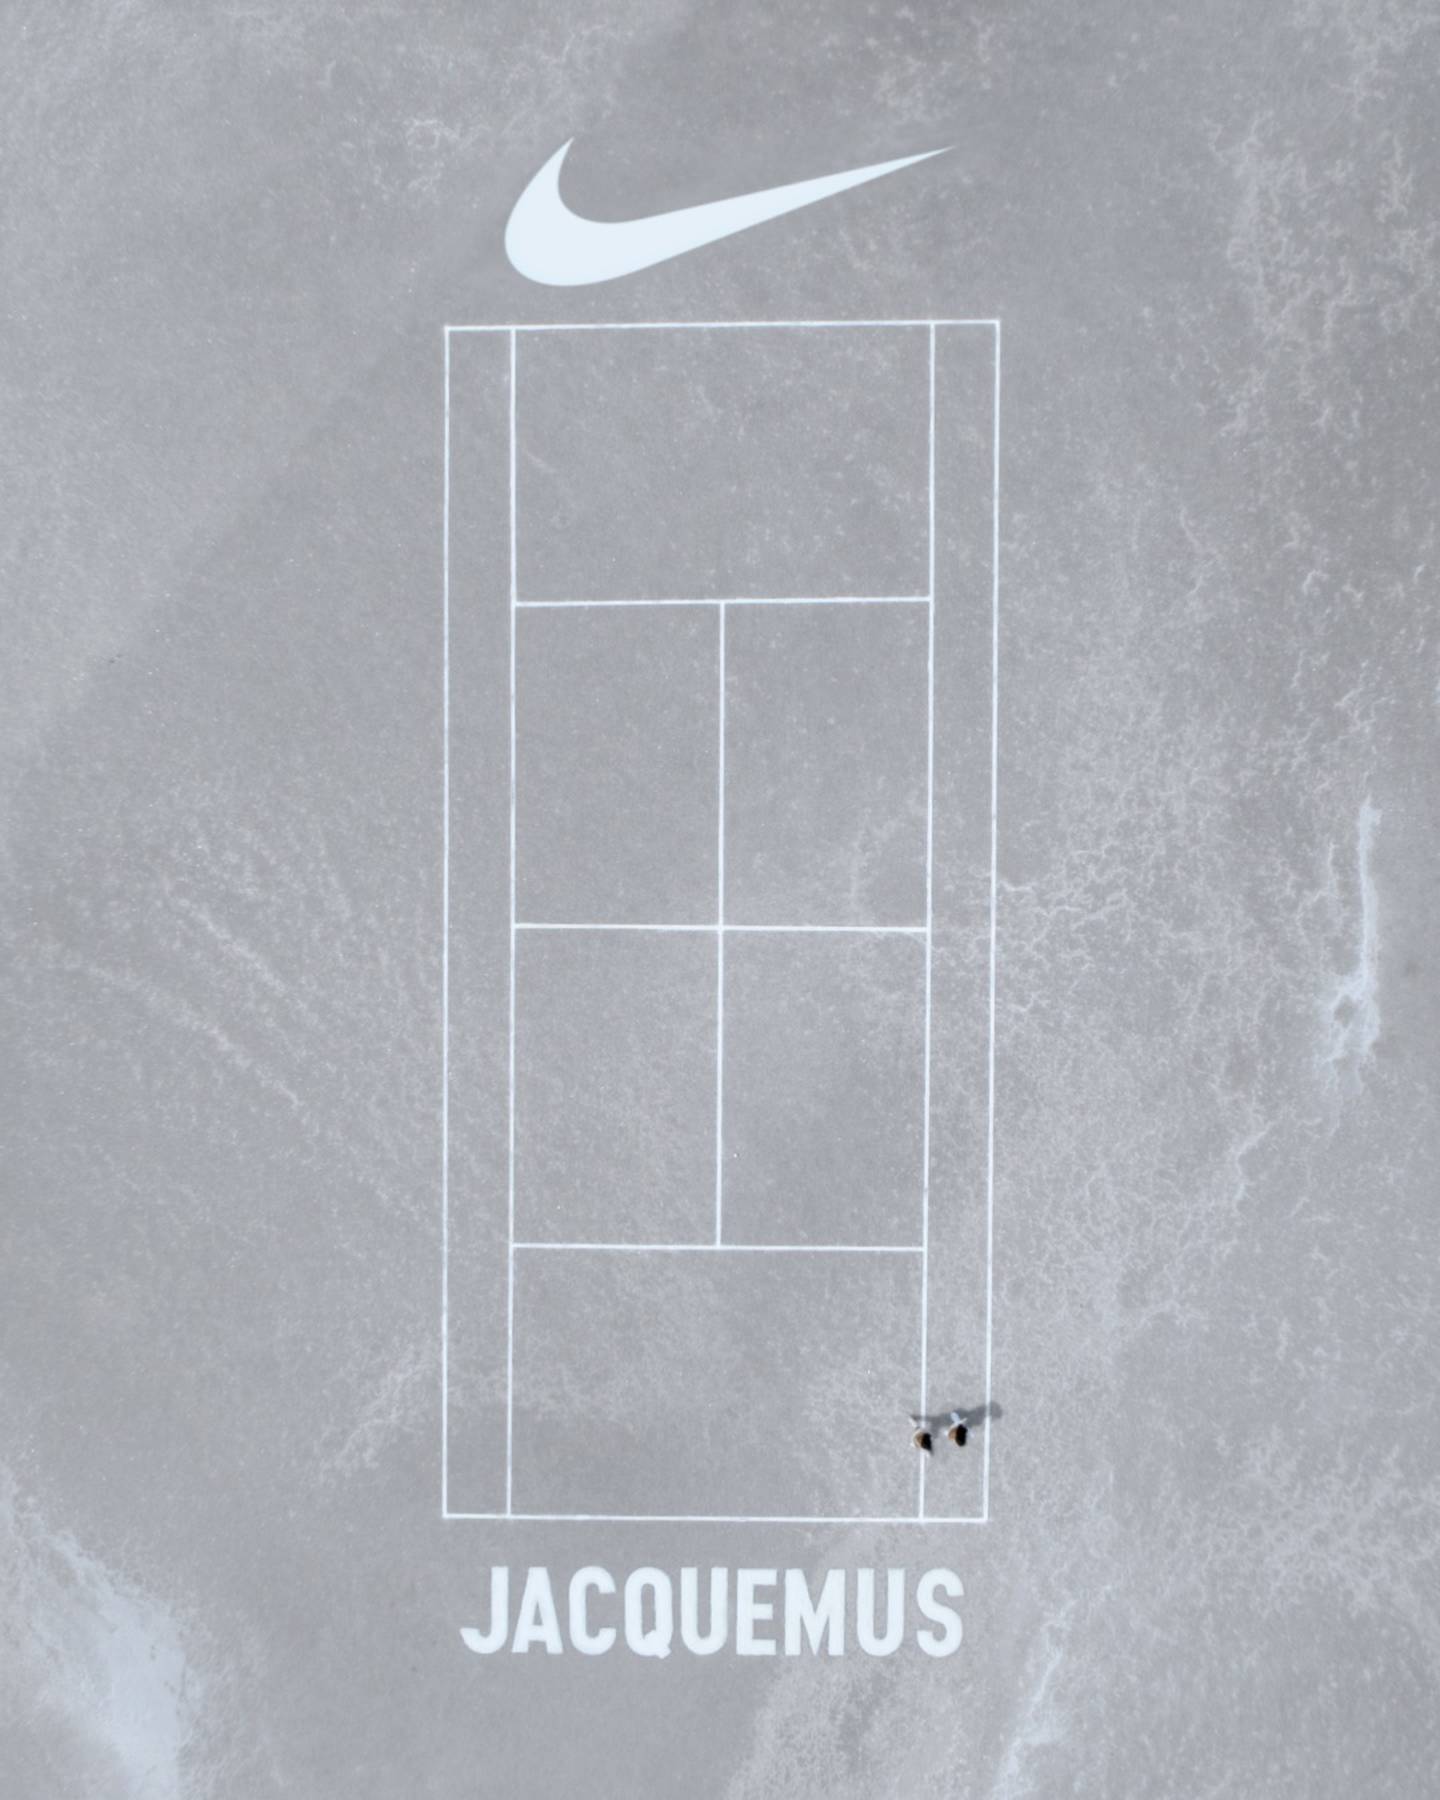 Jacquemus confirmed a previously hinted-at collaboration with sportswear giant Nike.